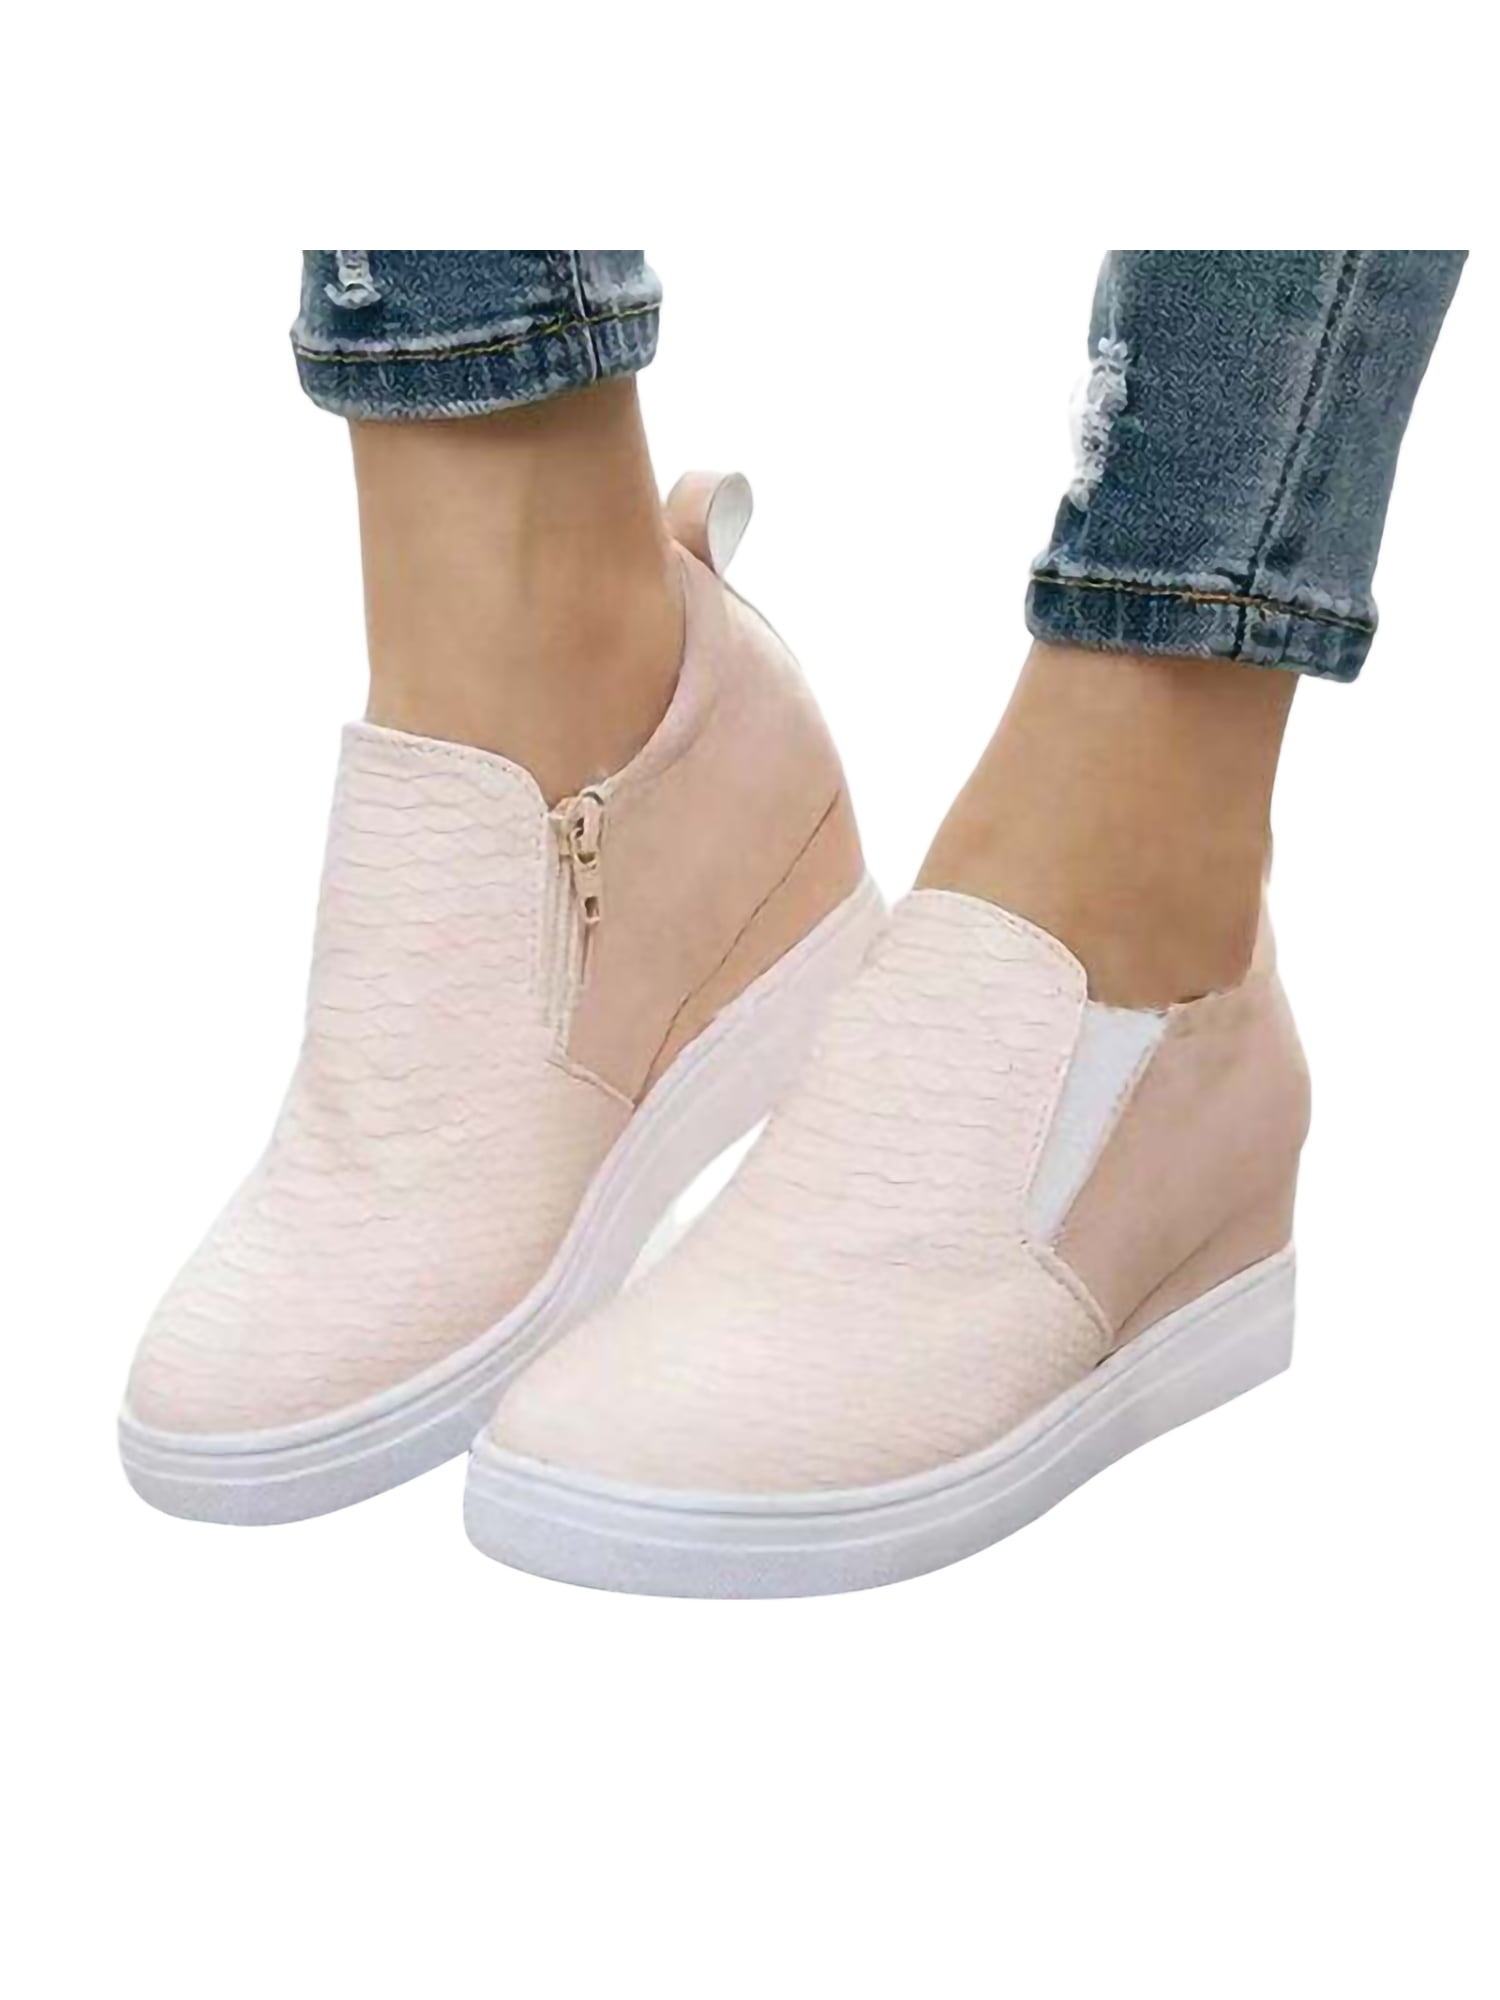 Stylish Women's Breathable Hidden Wedge Sneakers High Heel Sport Trainers Shoes 